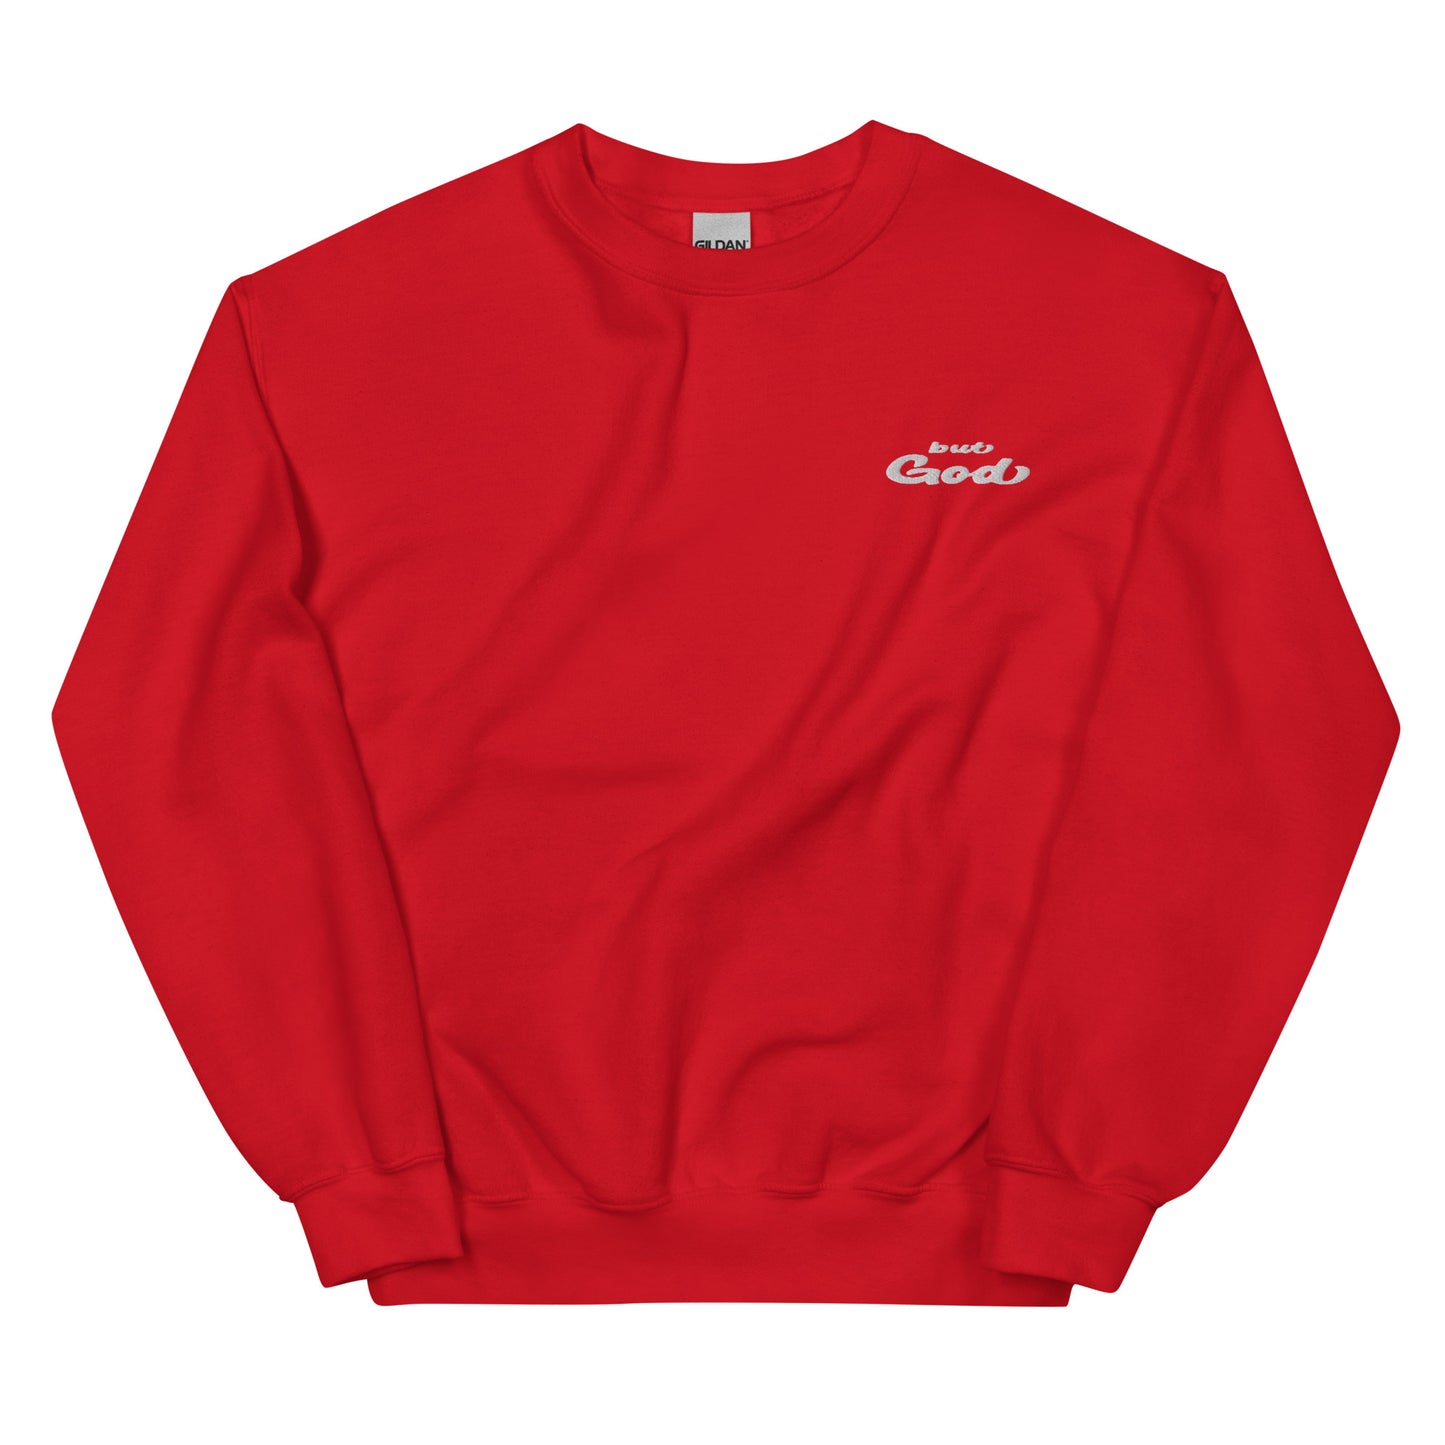 But God Embroidered Unisex Sweatshirt red